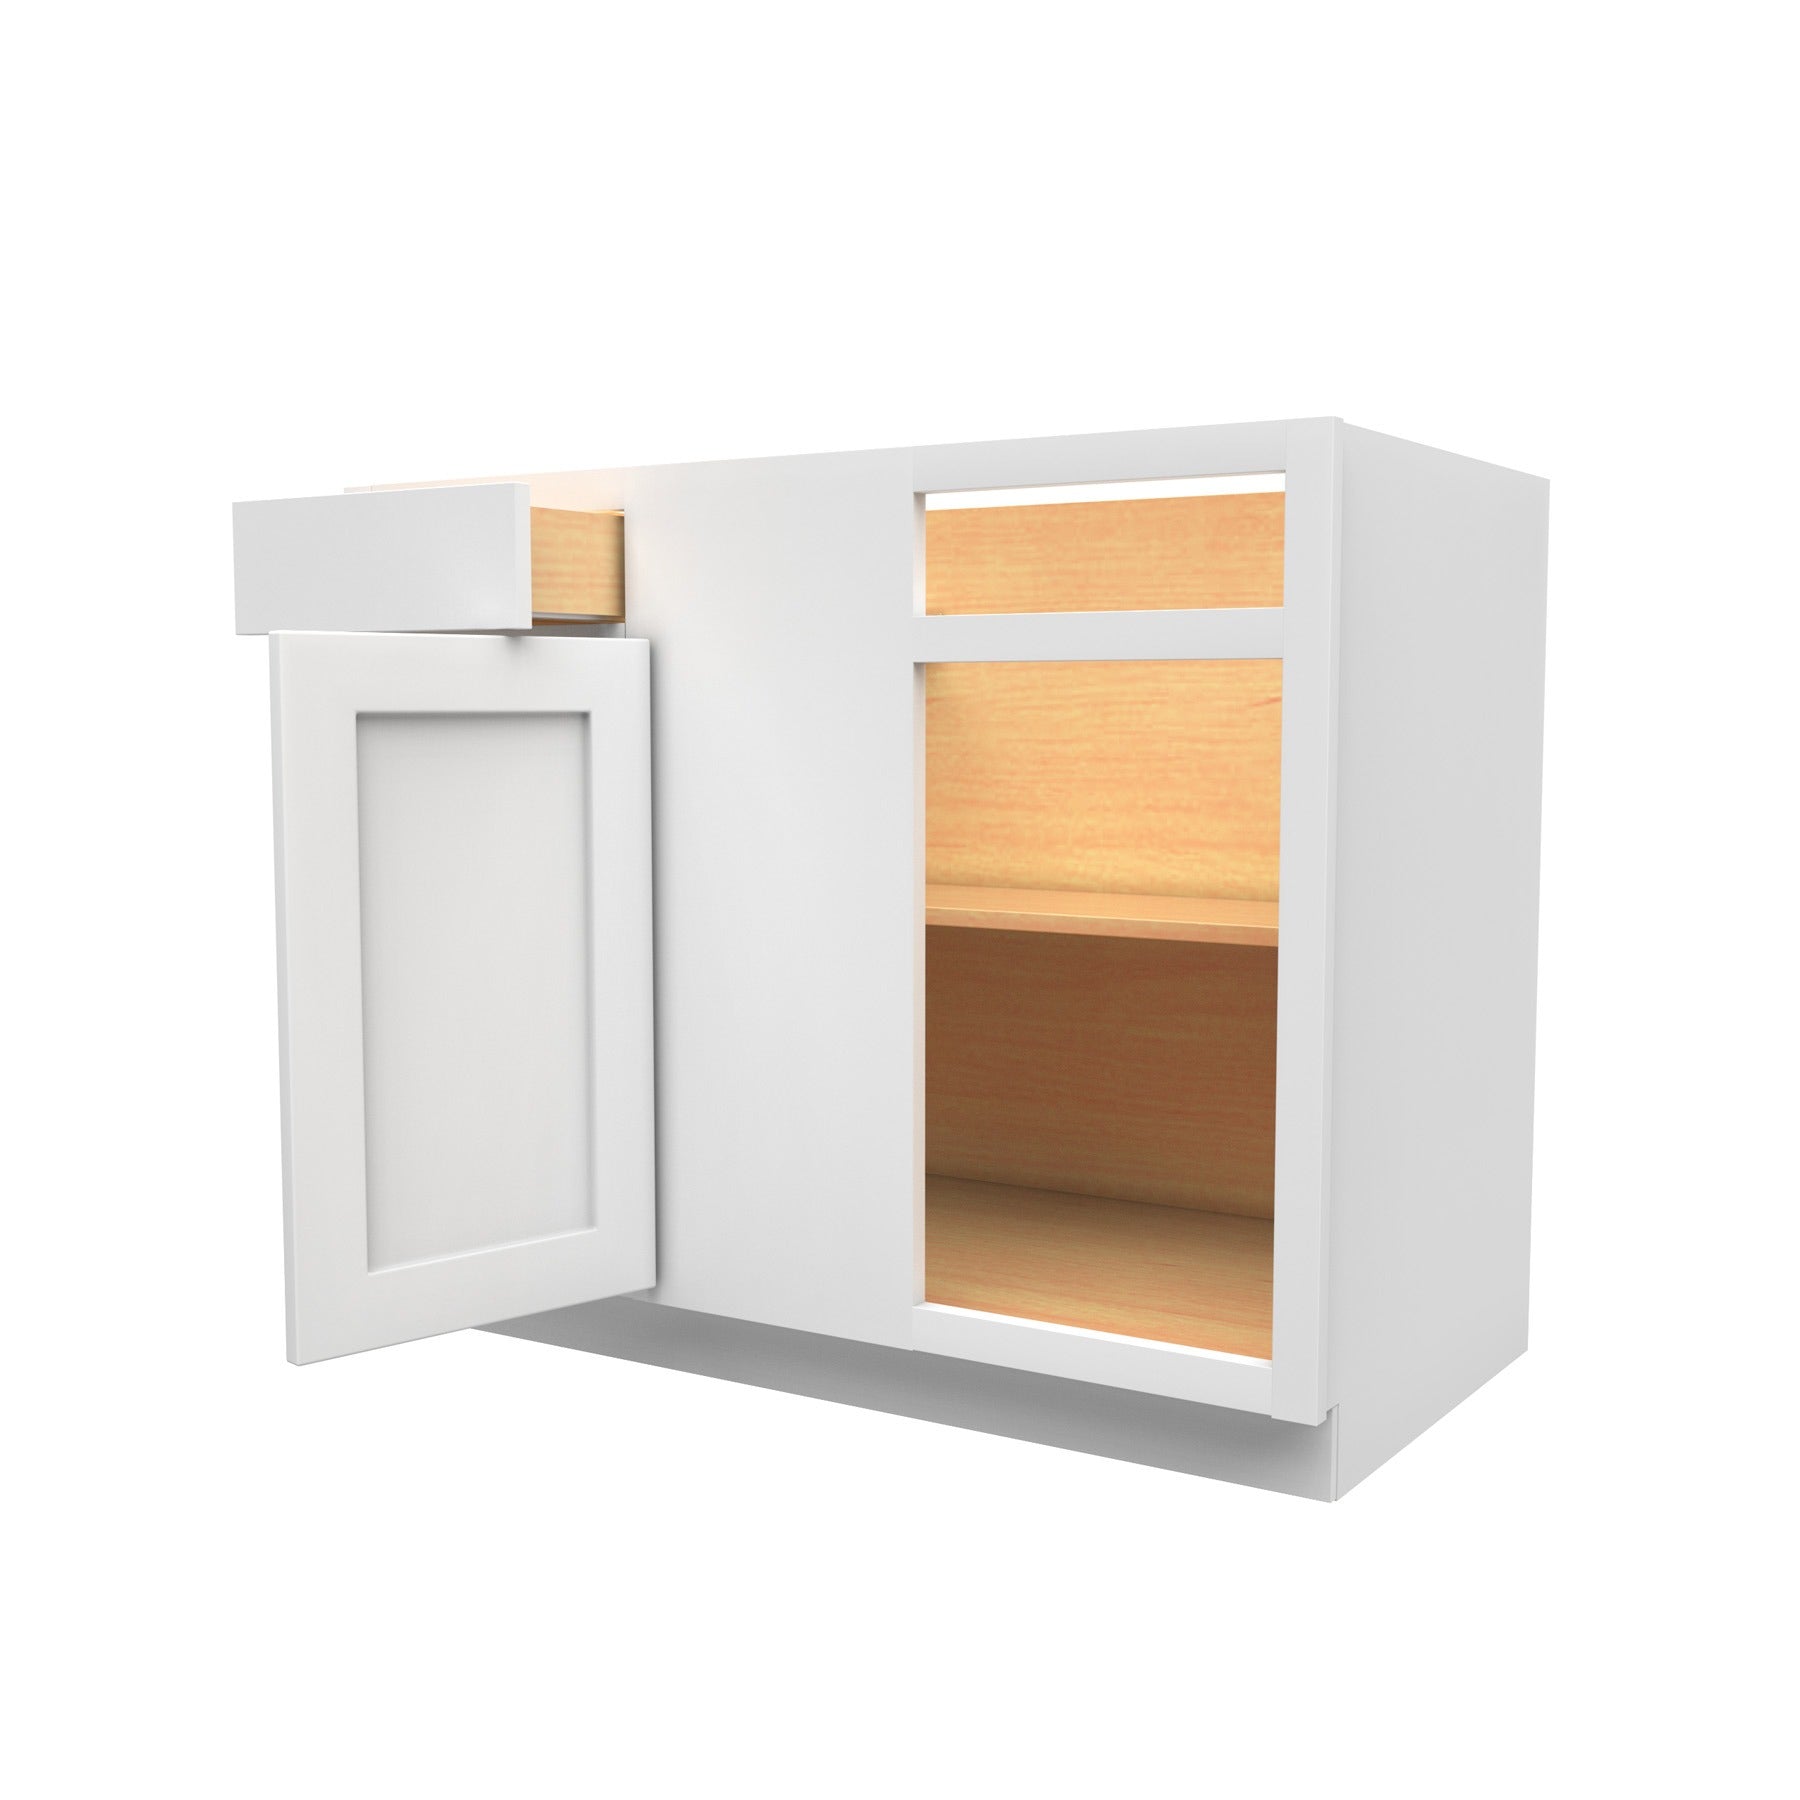 39 Inch Wide Blind Base Cabinet - Luxor White Shaker - Ready To Assemble, 39"W x 34.5"H x 24"D